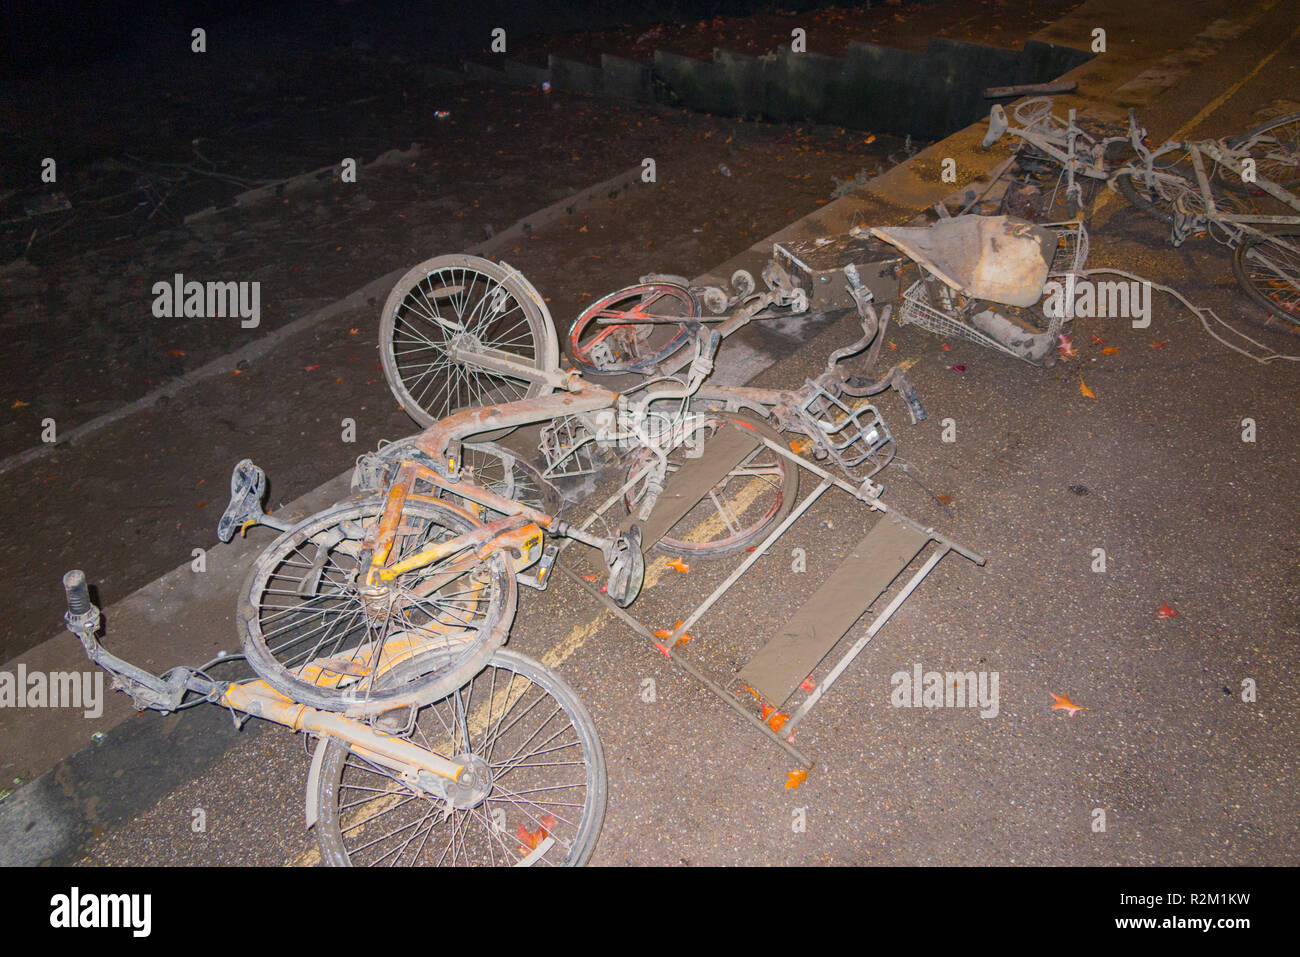 Collection of OFO bicycles dock less / dockless cycles / bike / Boris bikes which have been dredged up from the River Thames at Twickenham shown at night. UK Stock Photo